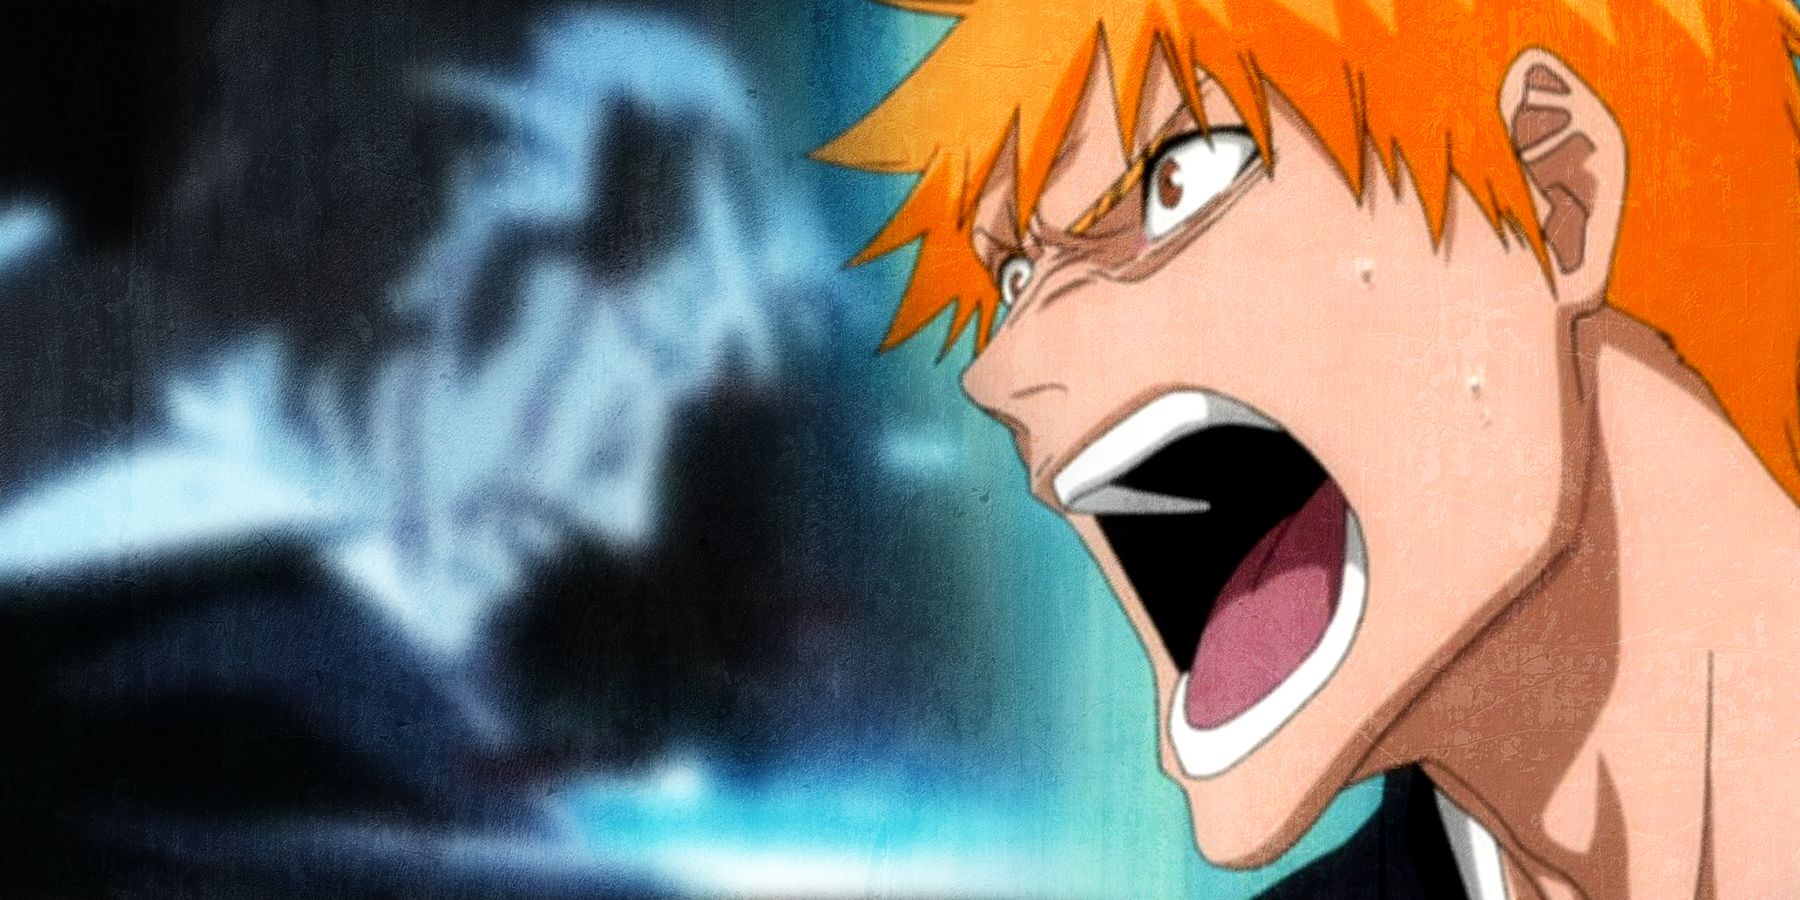 On the right, Ichigo yells in anger while an unclear figure on the left collapses.